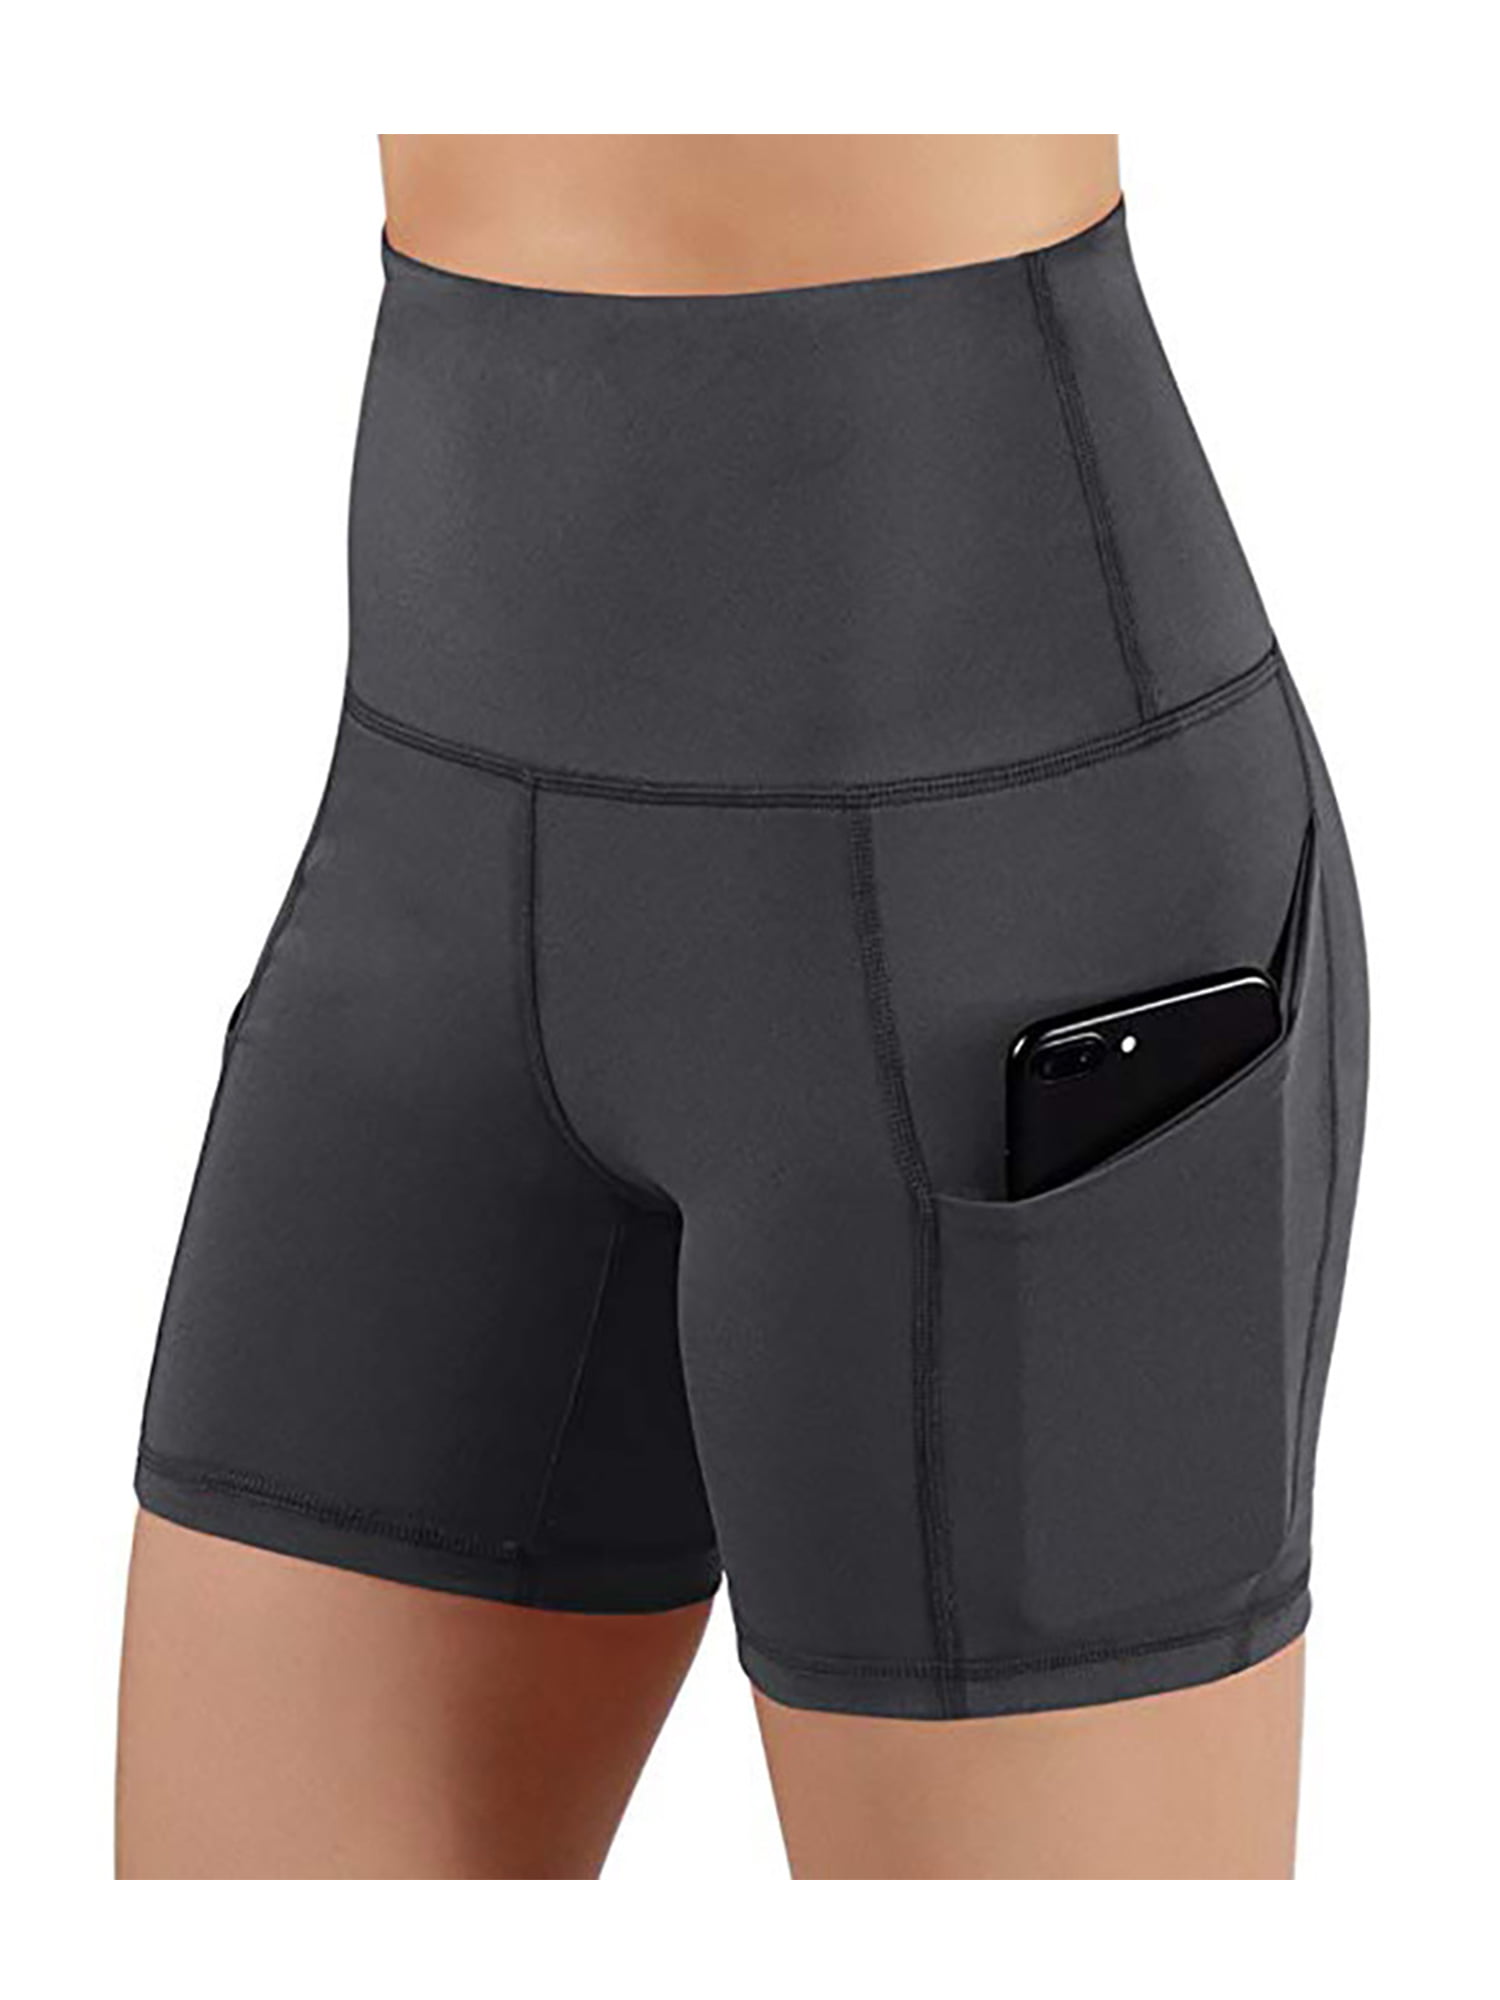 Kfnire Women's 5/8 High Waist Workout Yoga Shorts Non See Through Fitness Tights Butt Lifting Short Tummy Control 4-Way Stretch Yoga Leggings Booty Shorts Fitness Athletic Running Sports Shorts